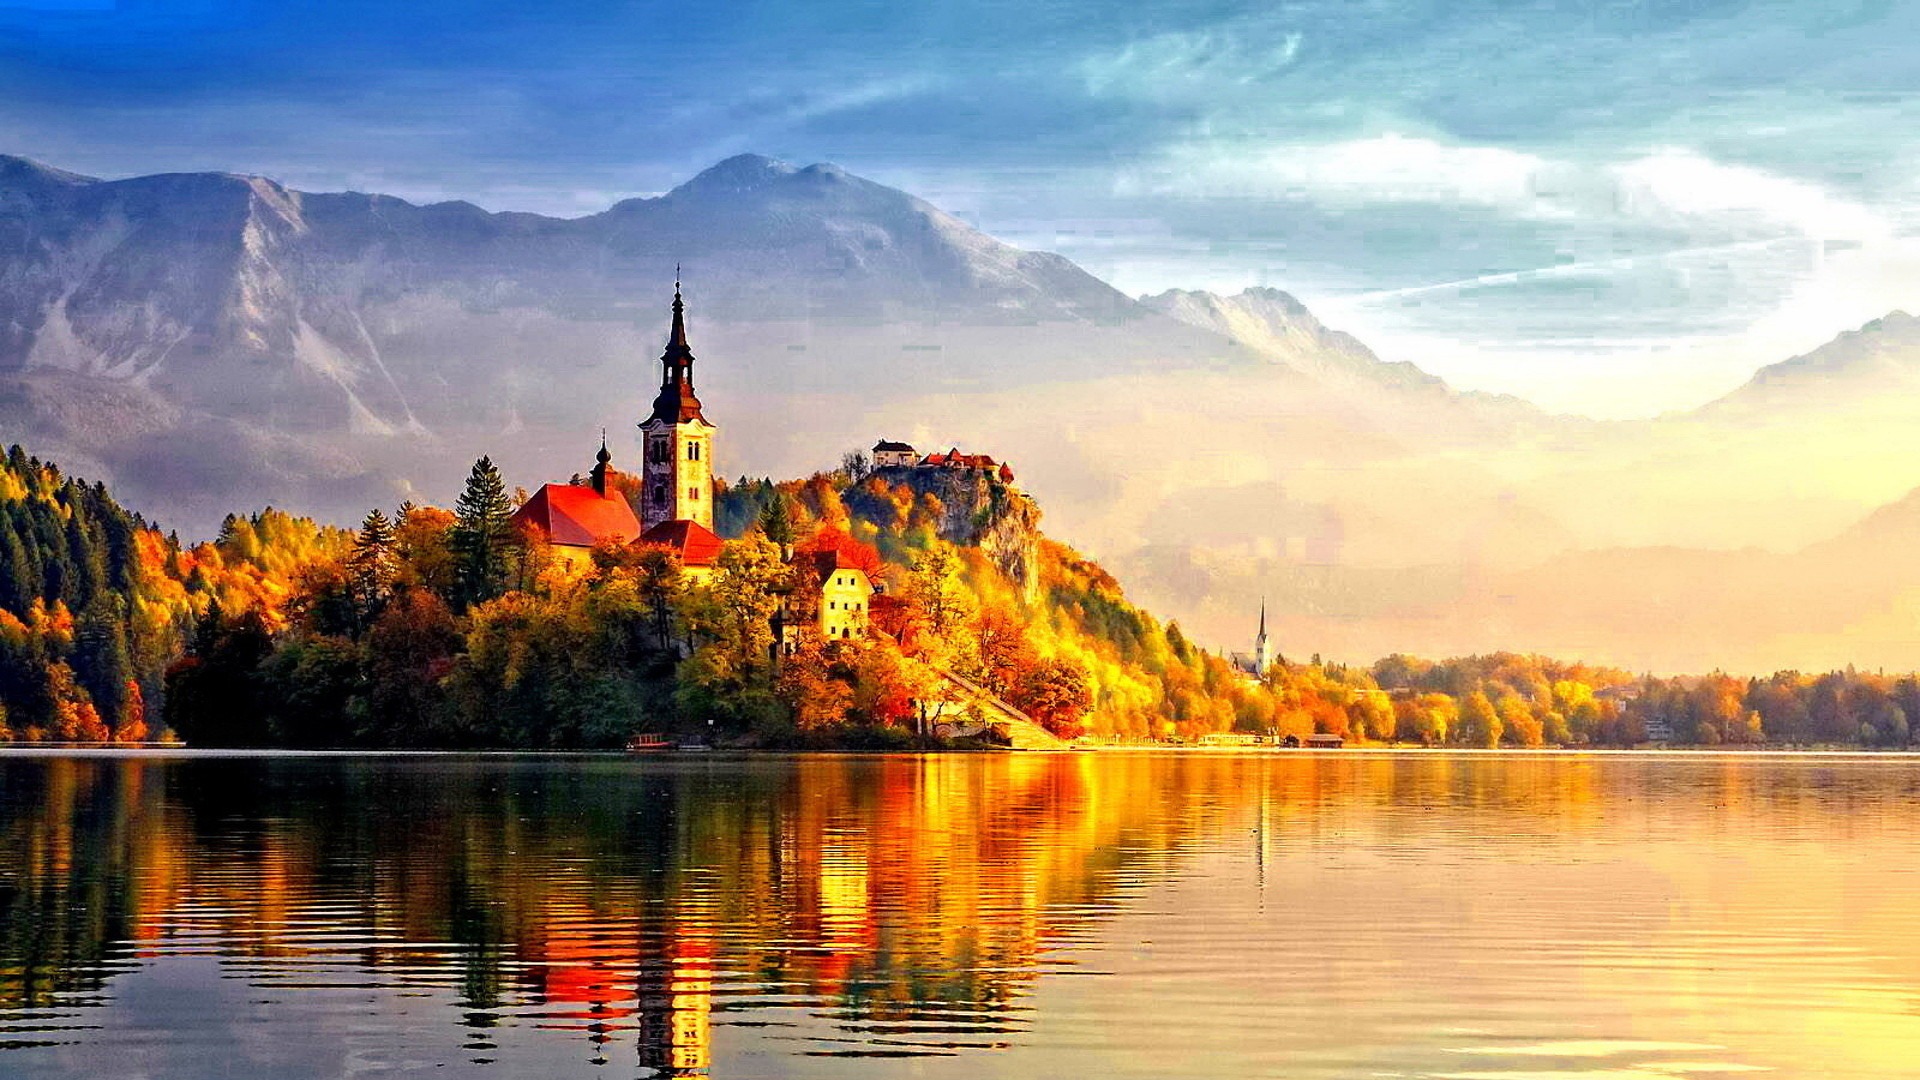 lake bled, religious, assumption of mary church, fall